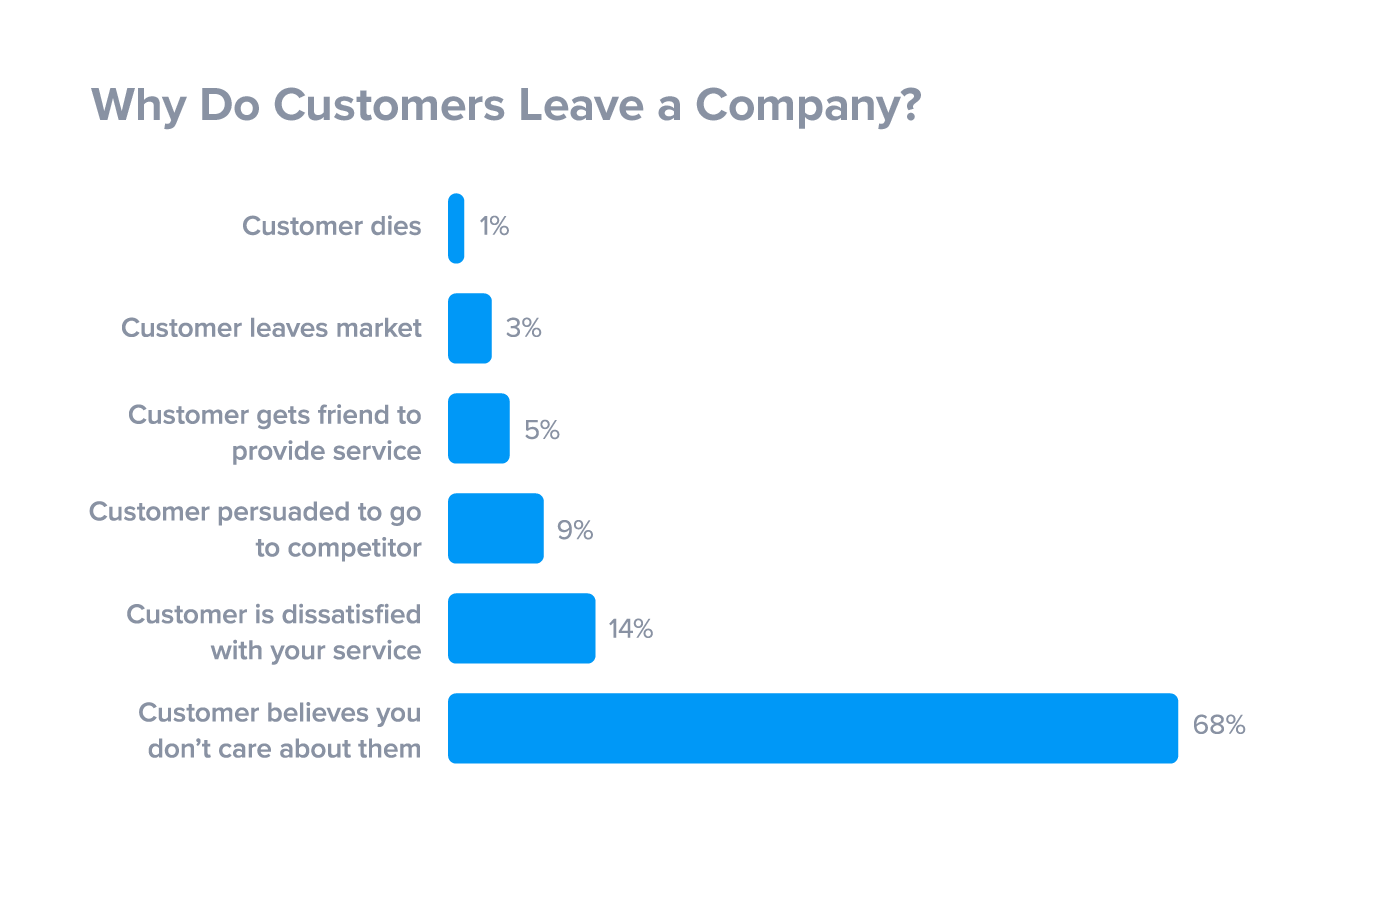 customers will leave if they feel you don't care about them